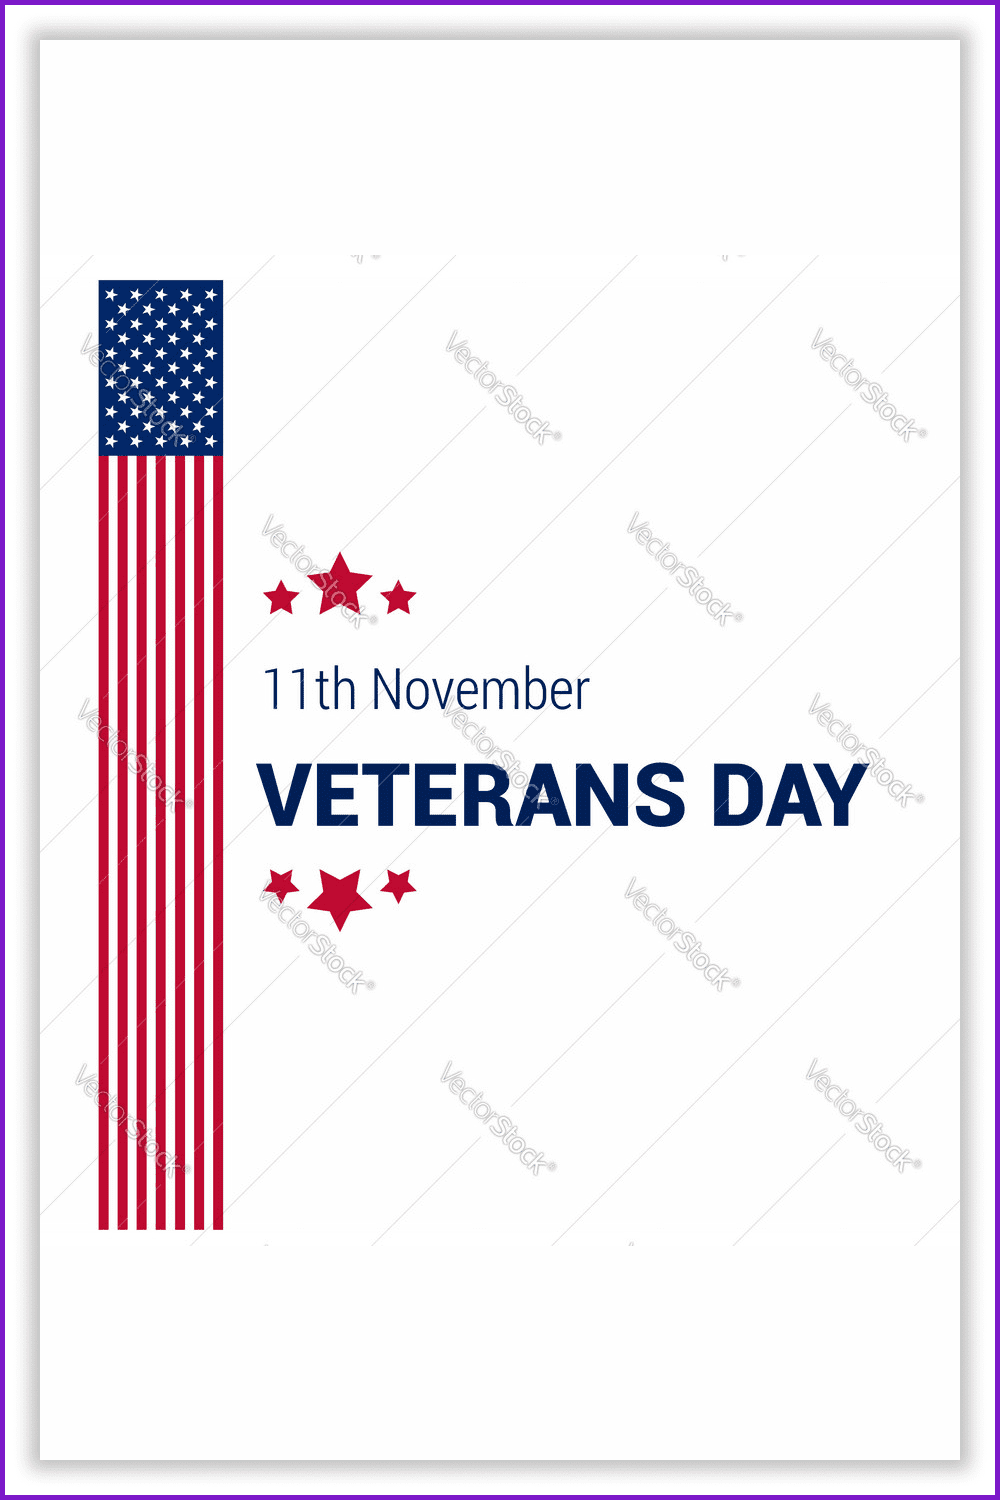 USA flag image and inscription Veterans Day.